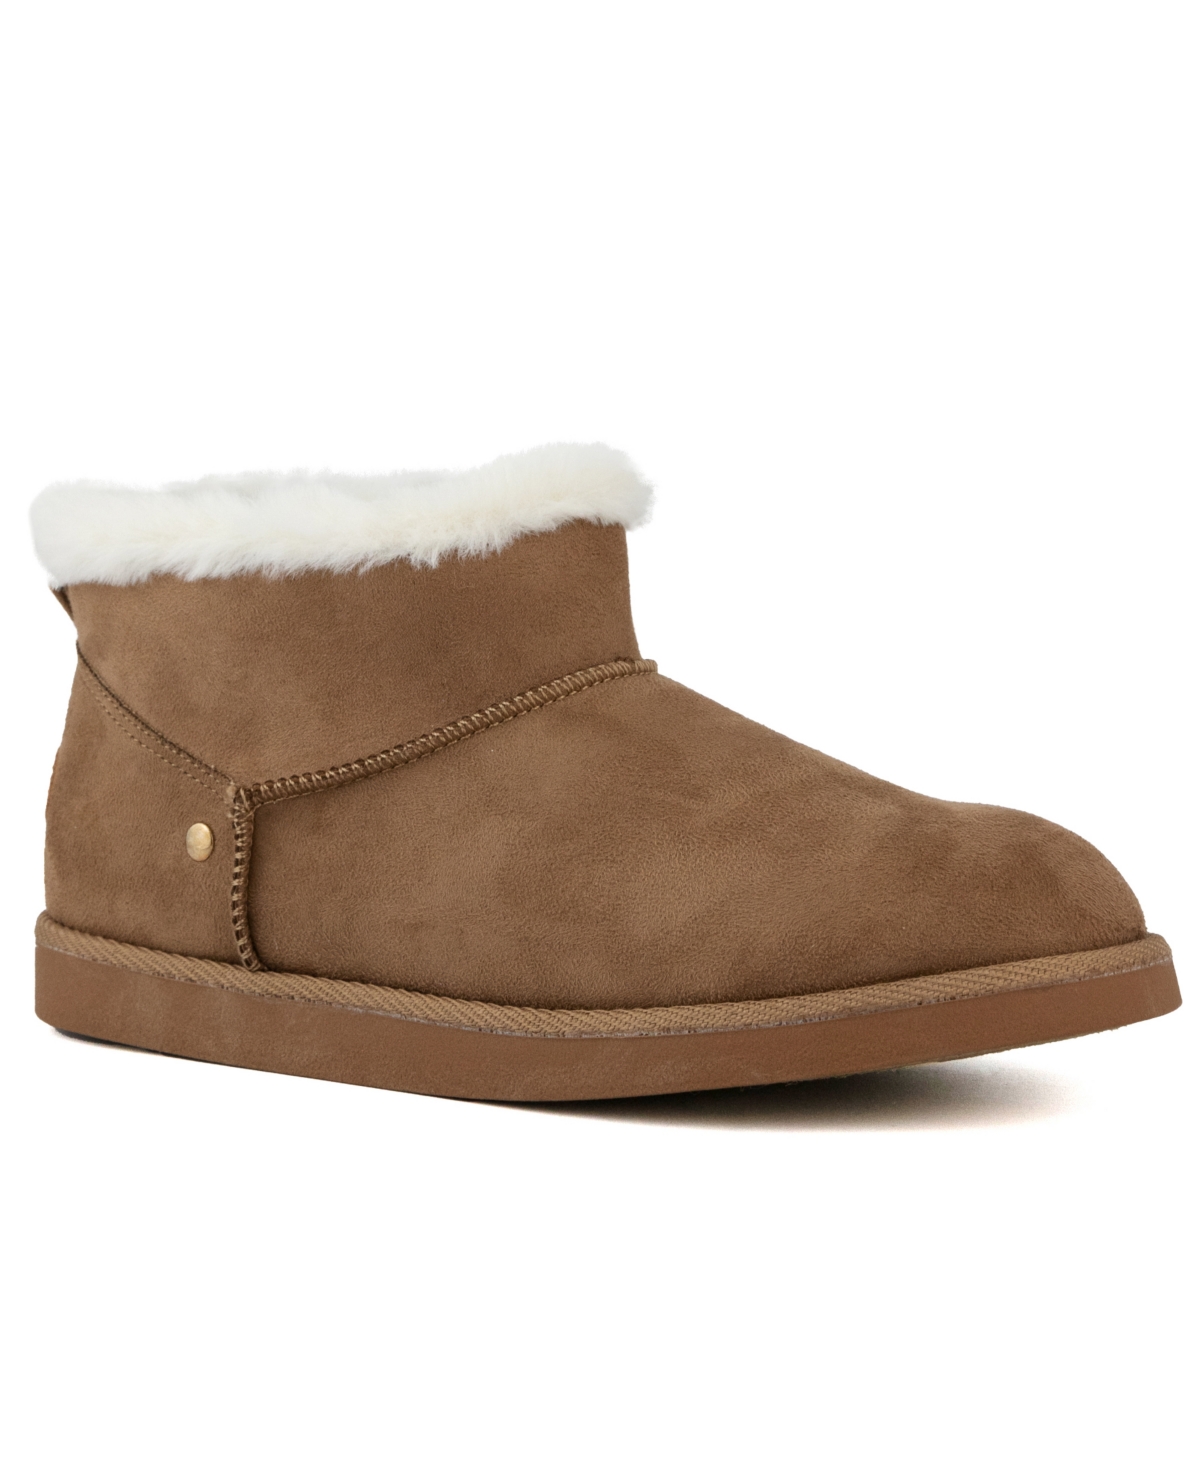 Women's Konoa Cold Weather Faux Fur Ankle Booties - Brown